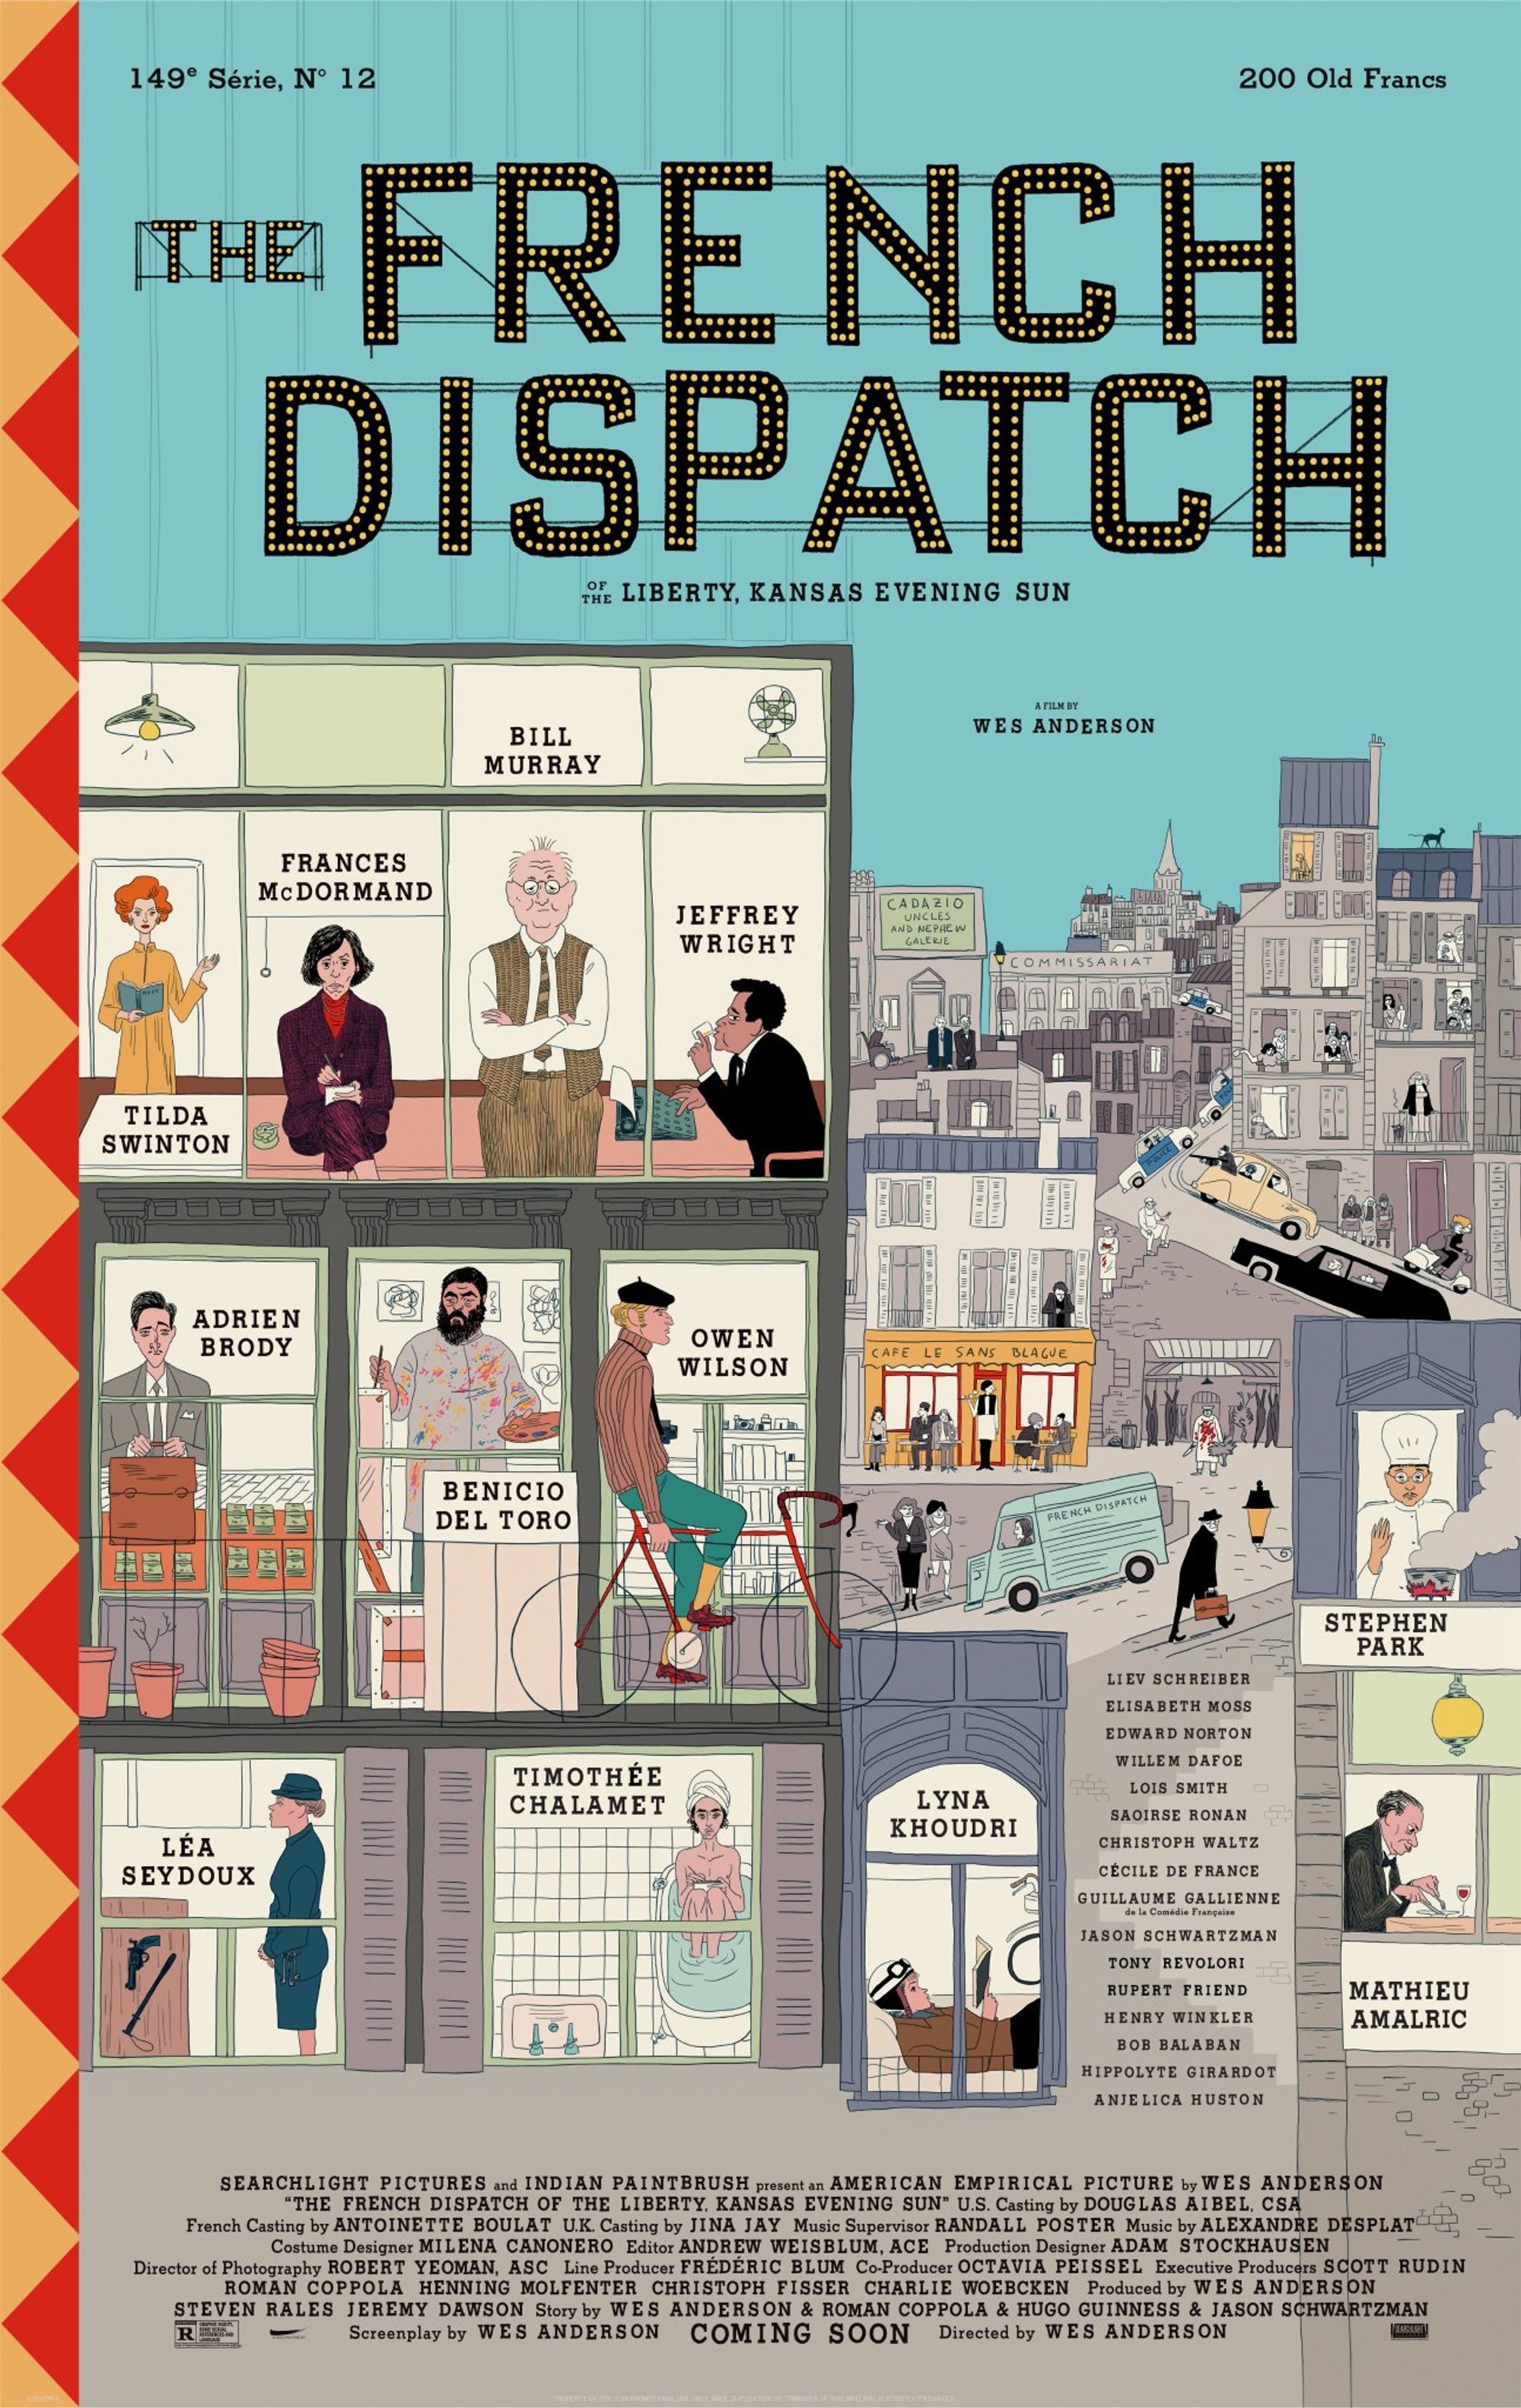 Official poster for The French Dispatch by Wes Anderson    Comissioned work for the film The French Dispatch directed by Wes Anderson 